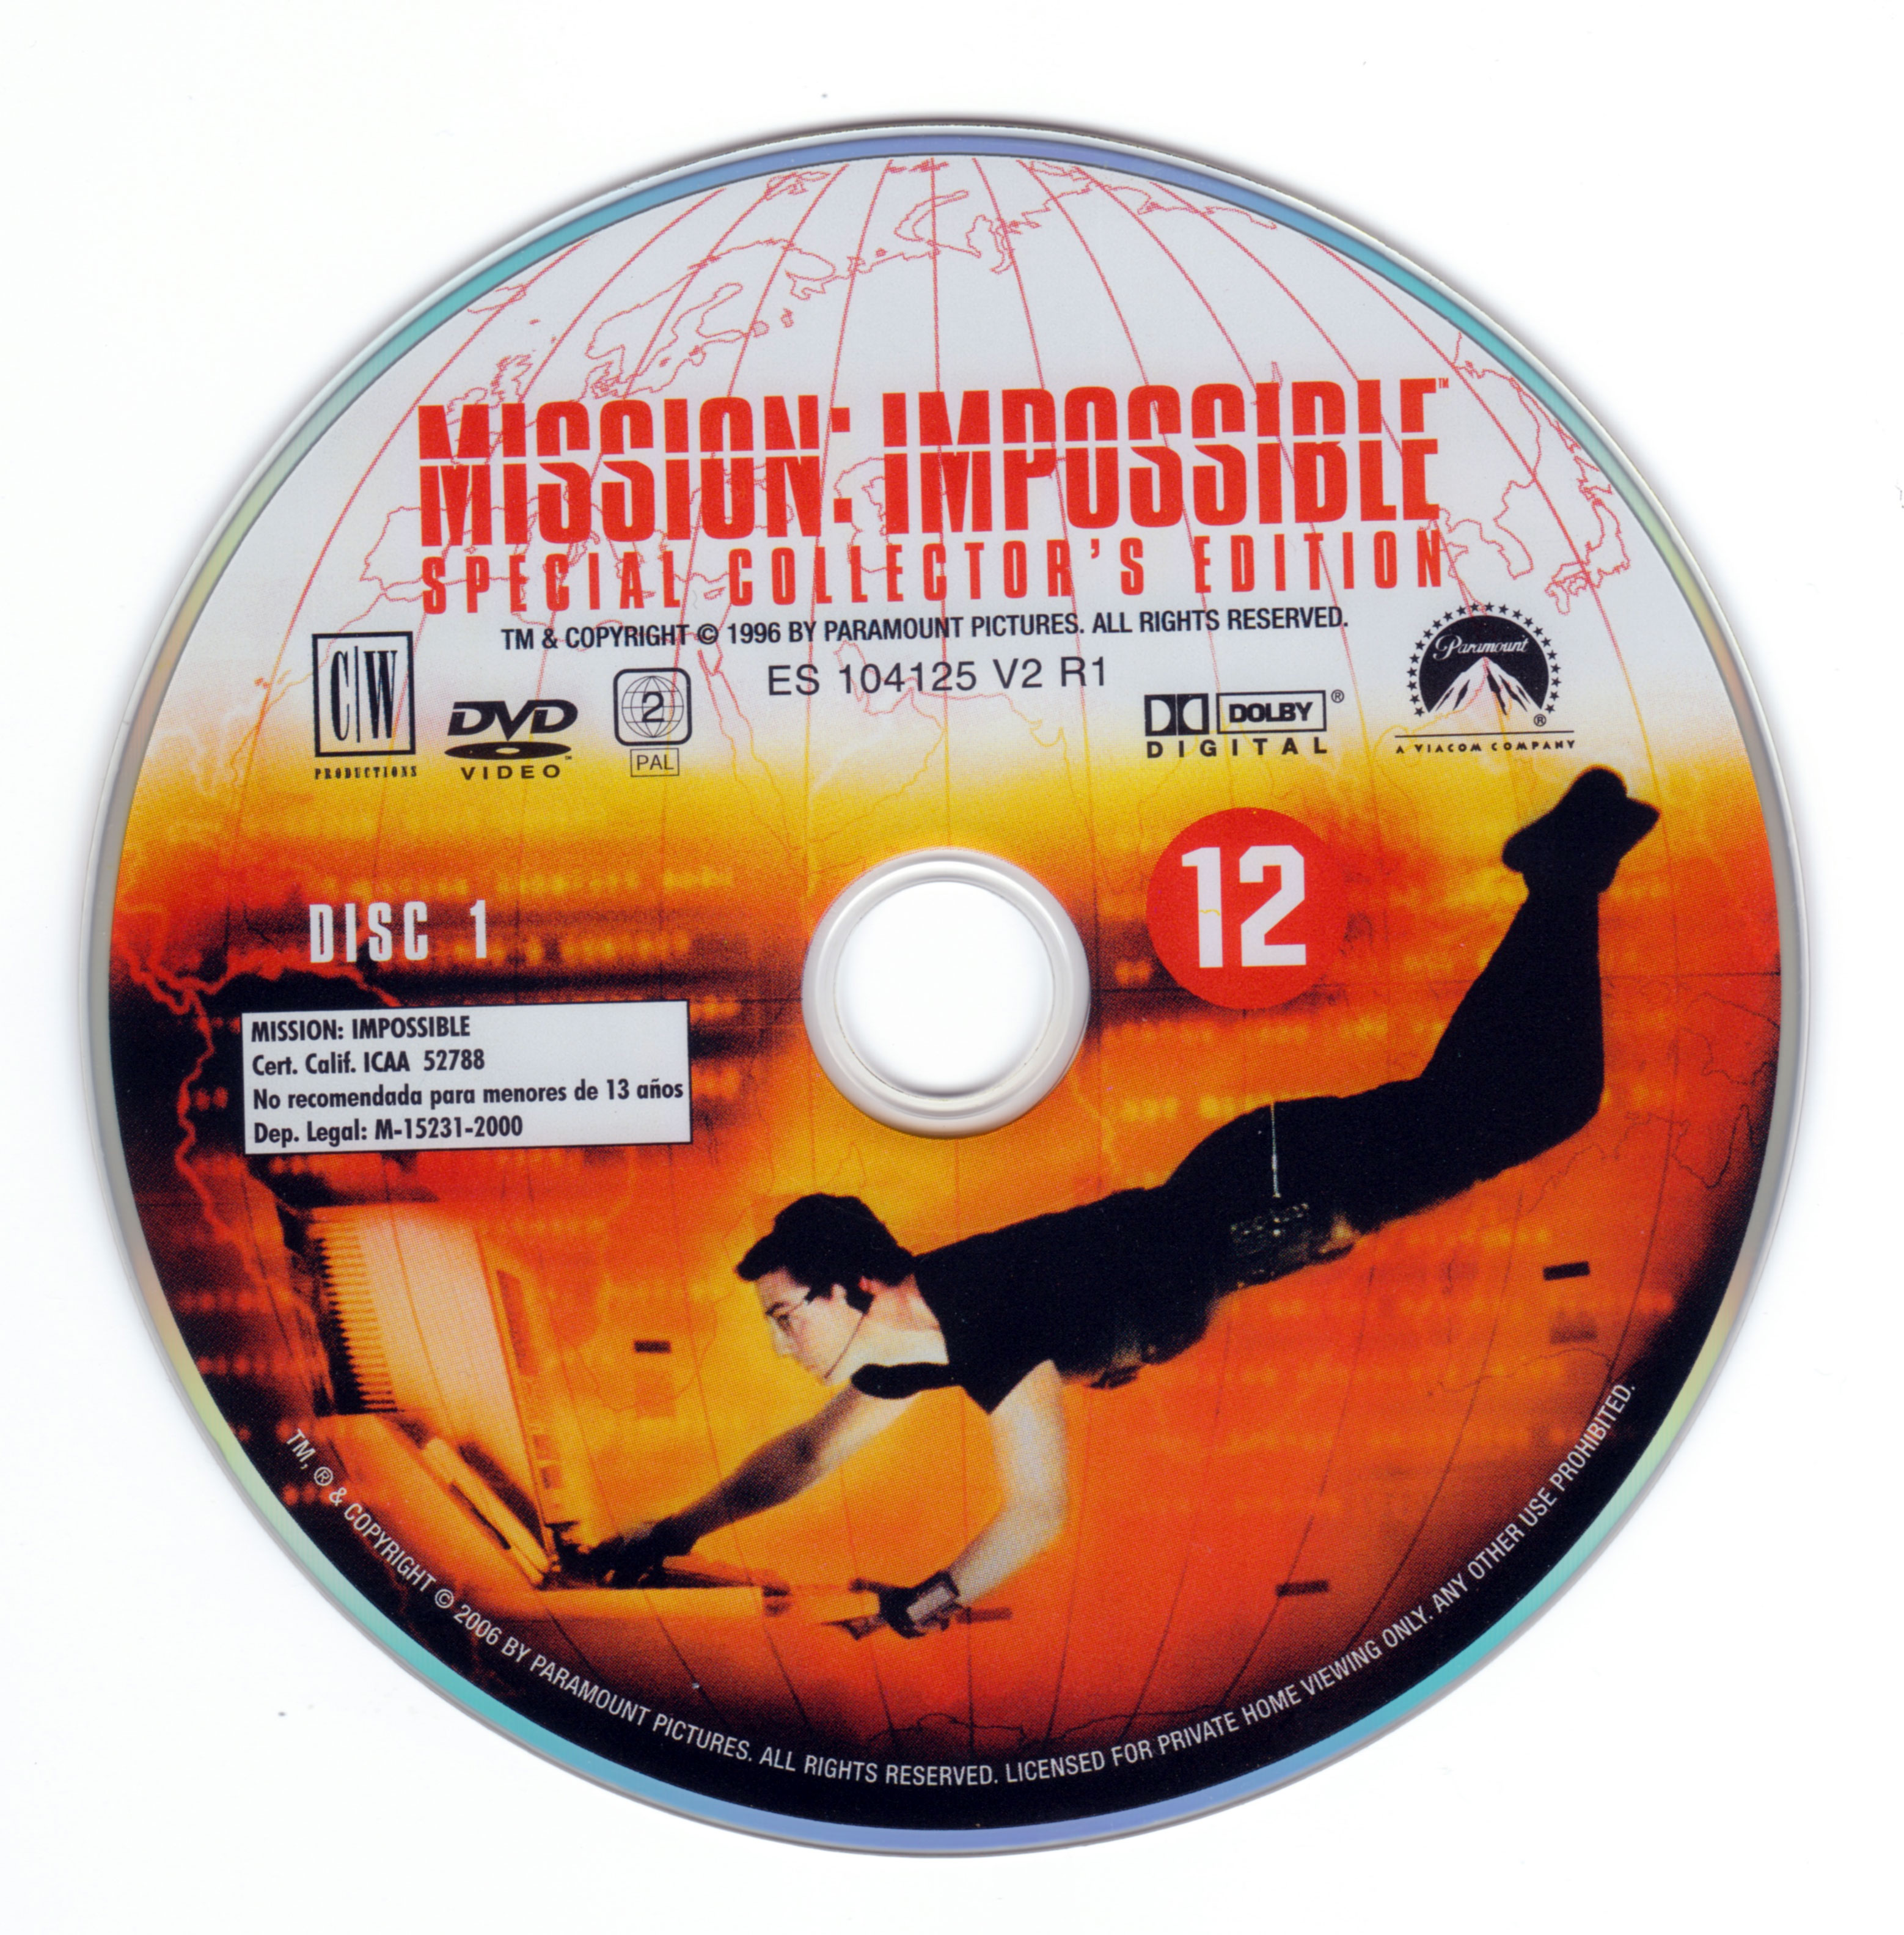 Mission impossible DISC 1